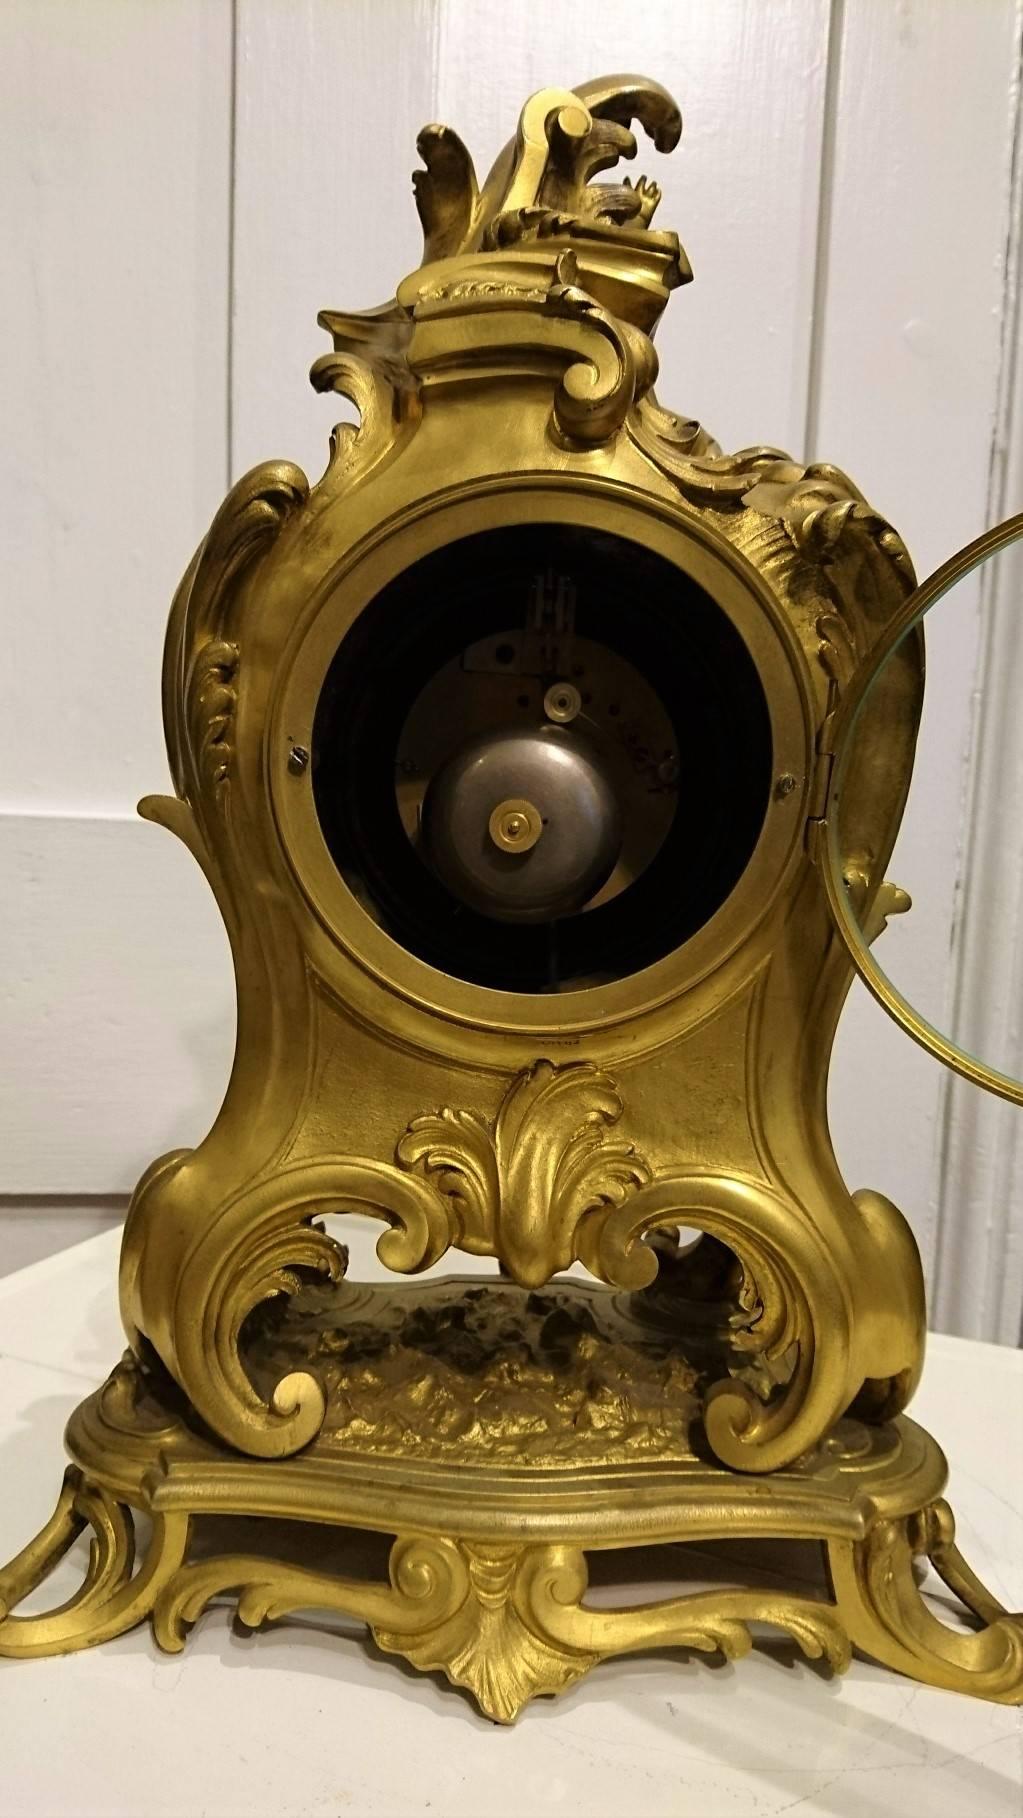 Beautiful, French Rococo style mantel clock by Vassy, Paris, circa 1860.

This stunning clock has an eight-day movement de Paris, which will strike the hours and half hours on a bell. The beautifully clear, white enamel dial, showing roman and